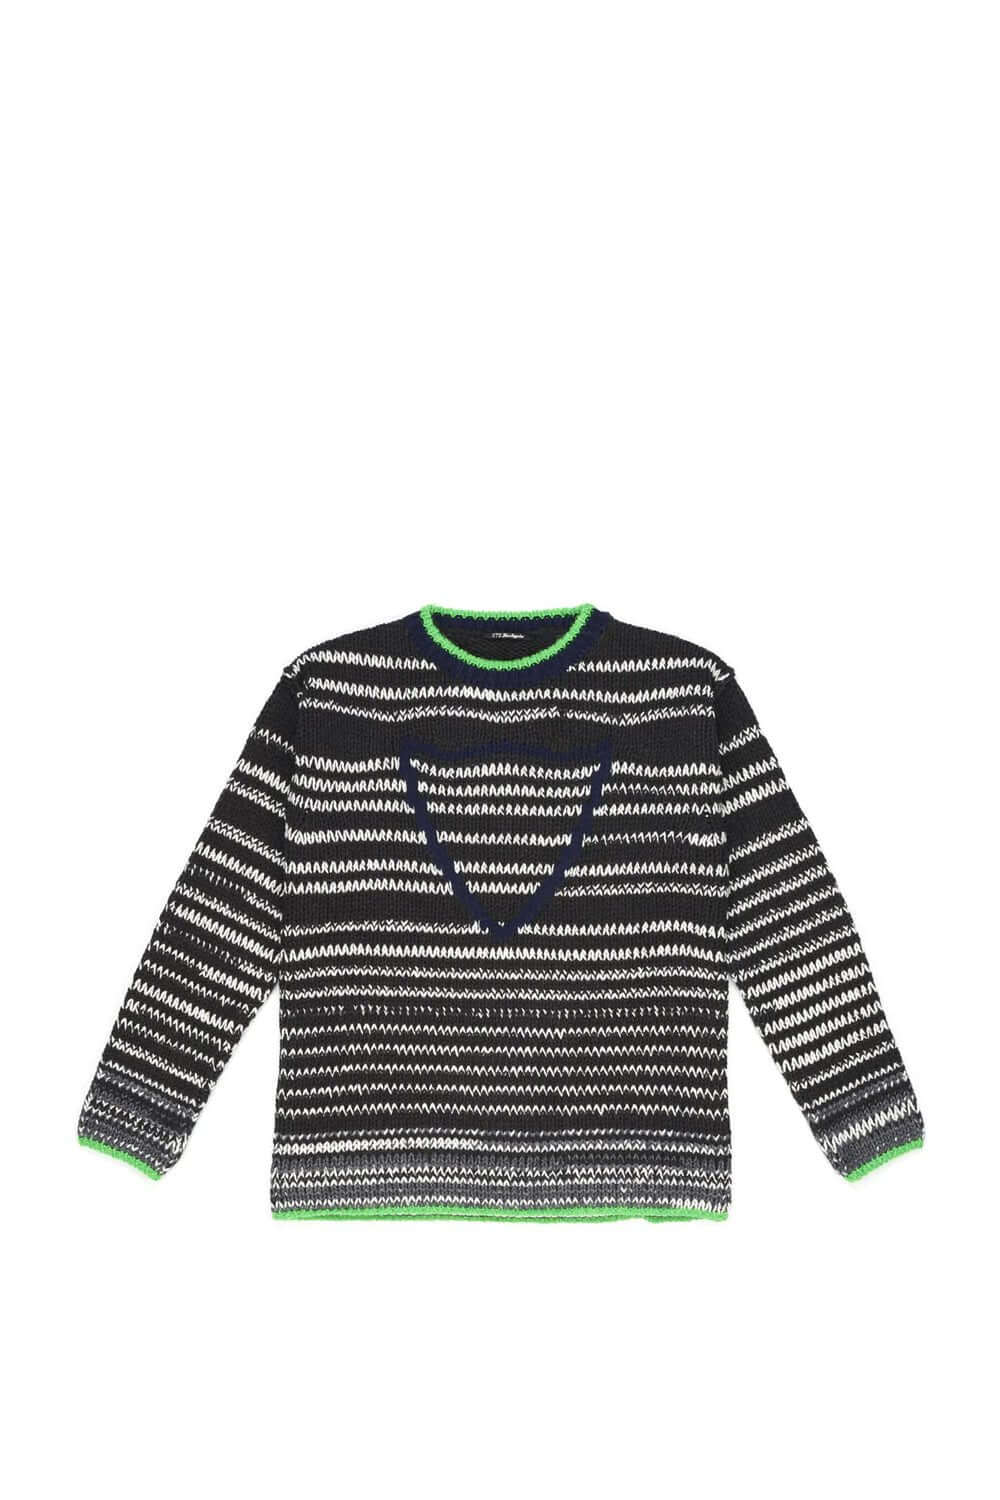 JOHNNY JUMPER Crew neck striped jumper. HTC logo on the front. 50% Acrylic 50% wool. Made in Italy. HTC LOS ANGELES